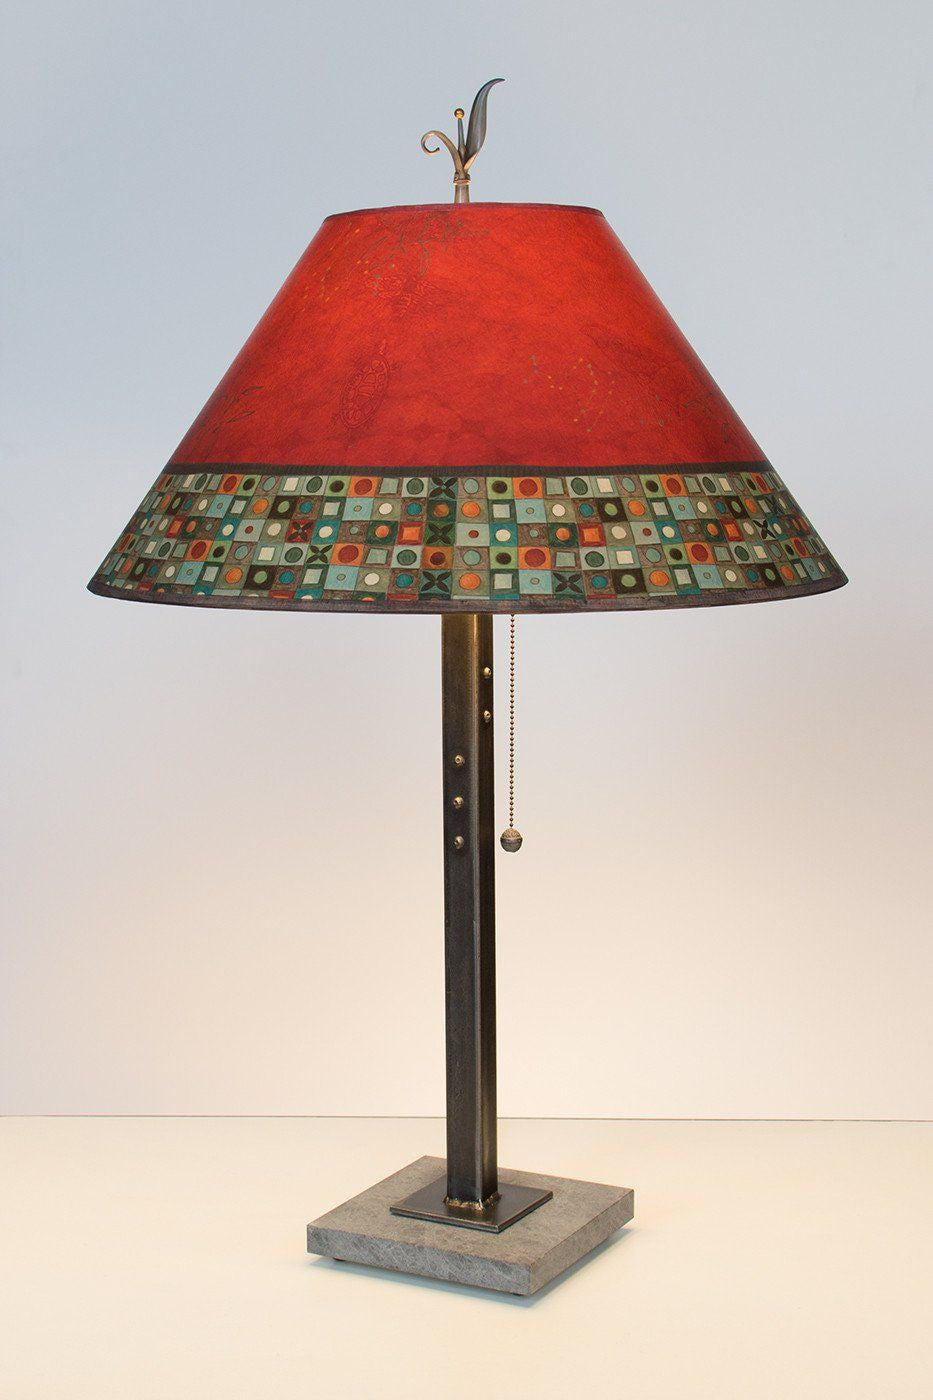 Janna Ugone & Co Table Lamps Steel Table Lamp with Large Conical Shade in Red Mosaic